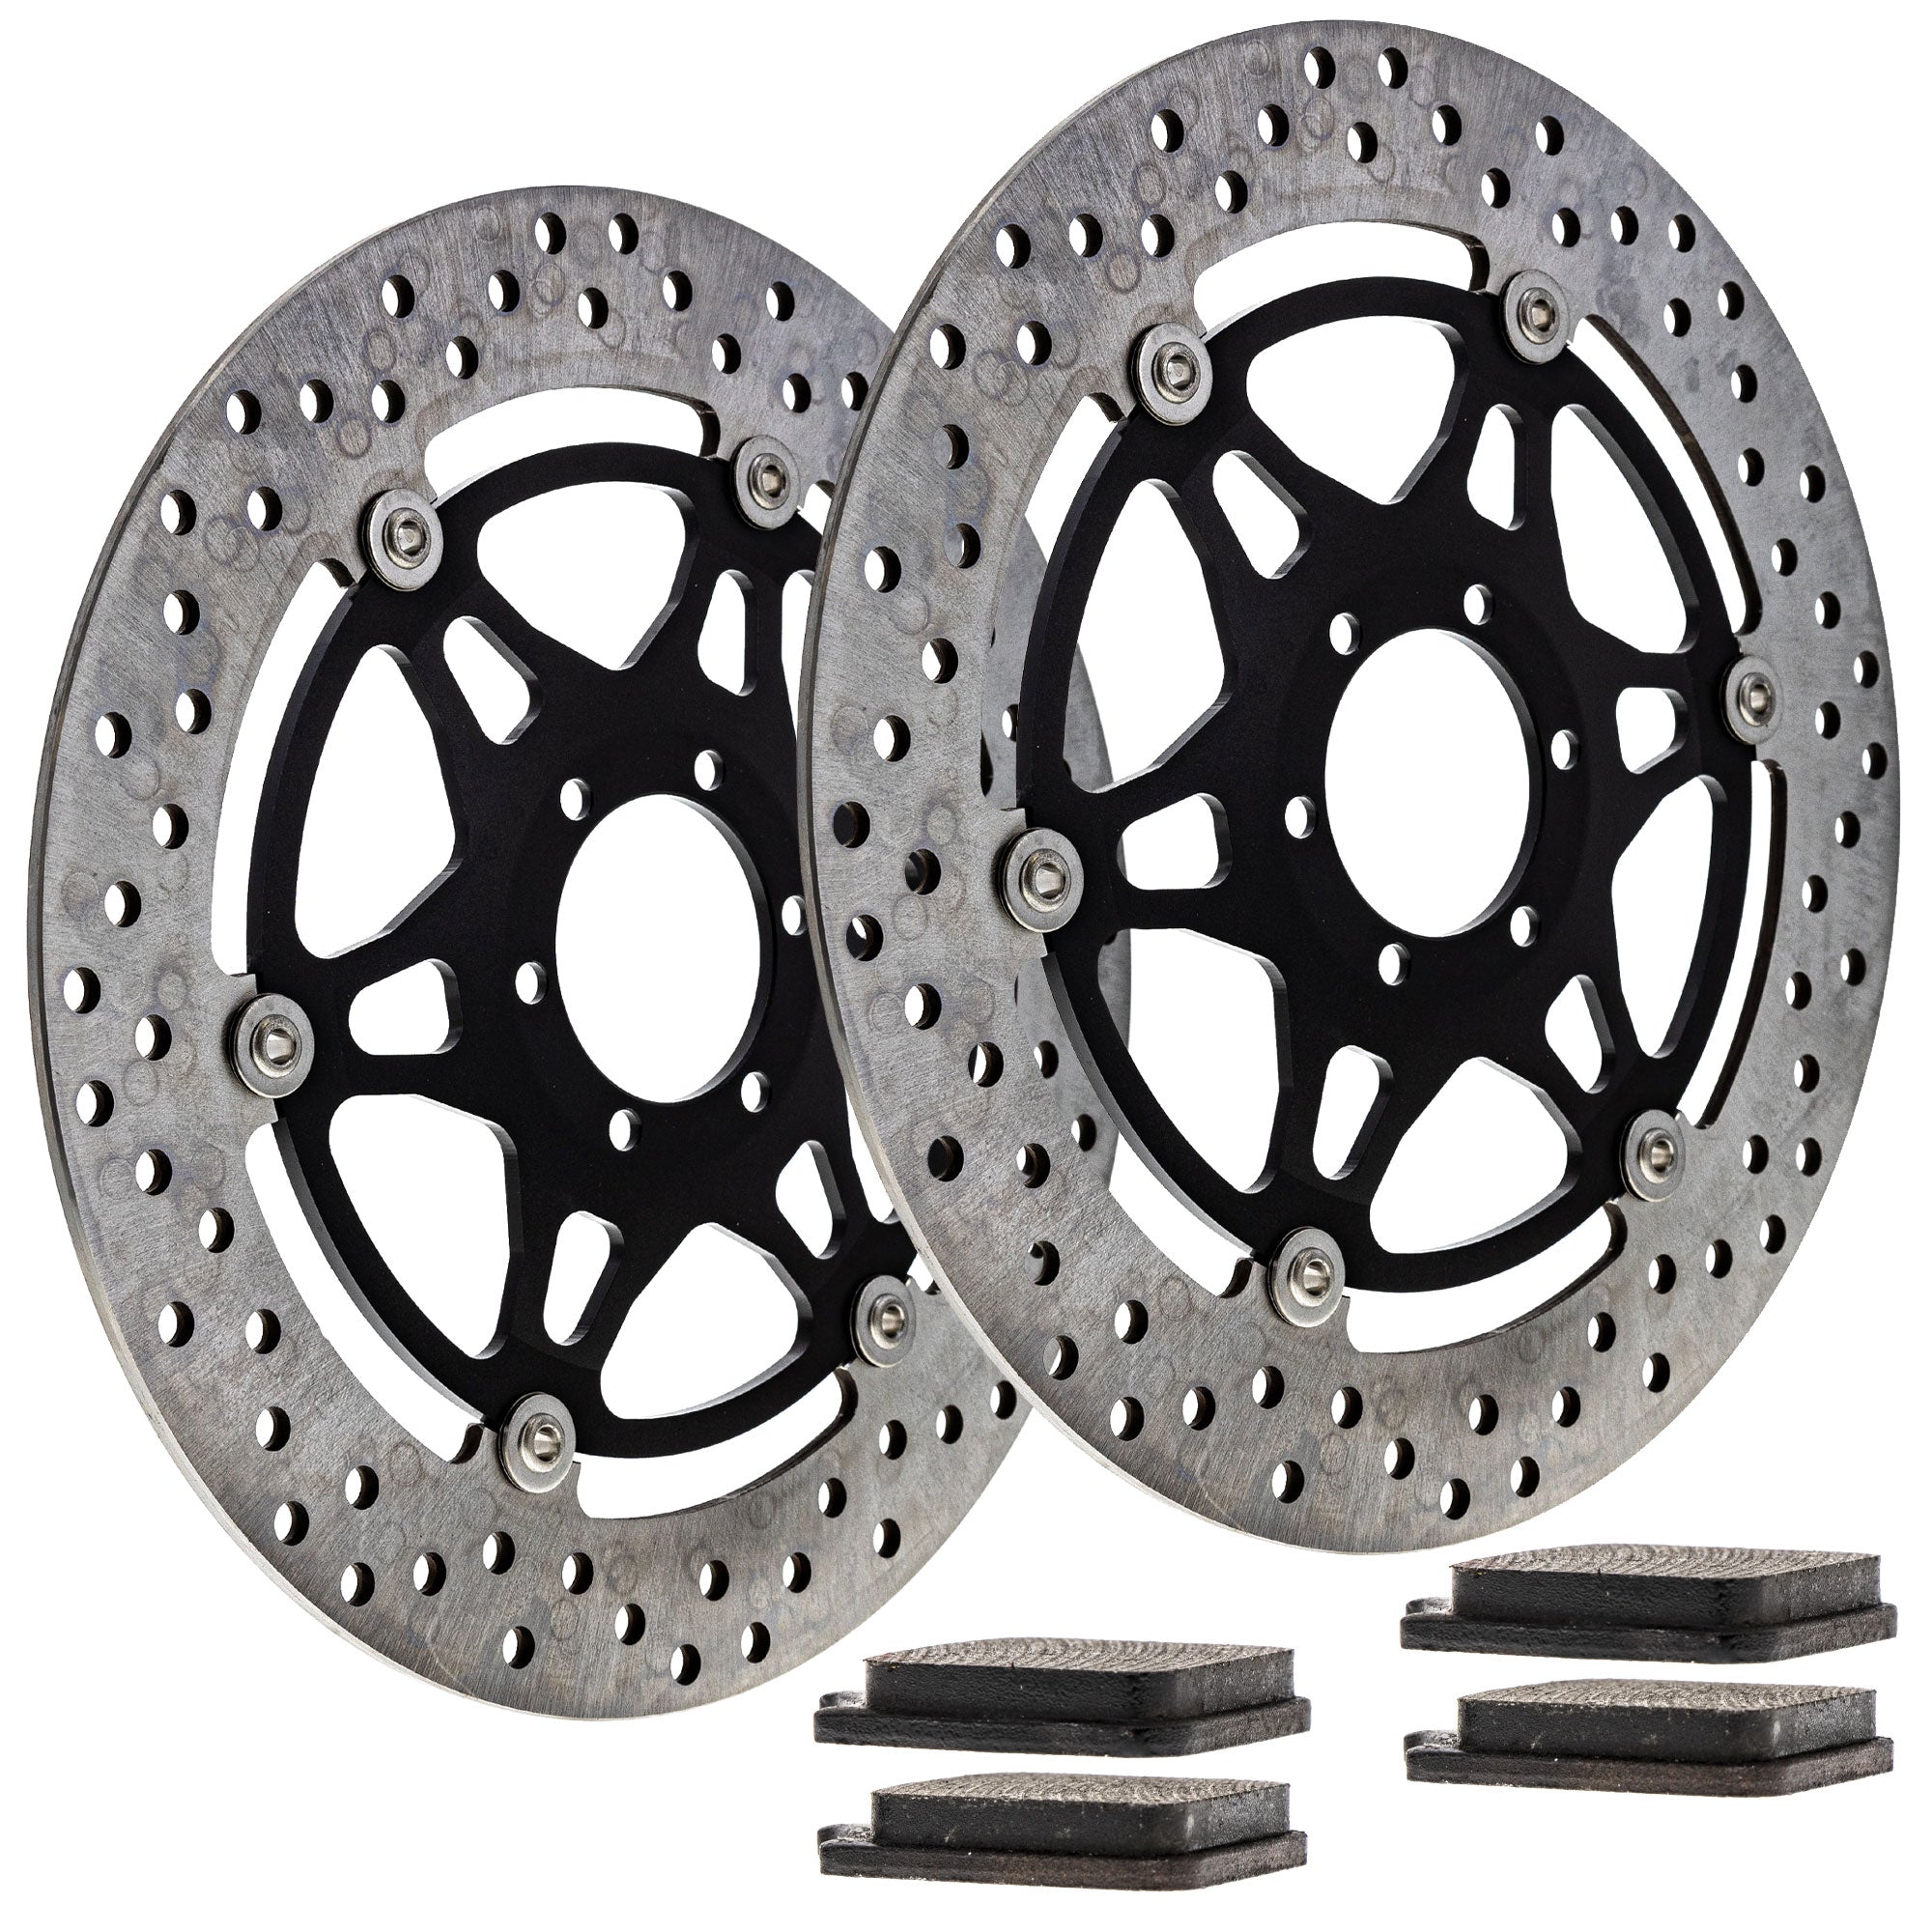 Complete Front or Rear Pad and Rotor Set for zOTHER Suzuki Kawasaki 996R 748 61013030000 NICHE MK1007439